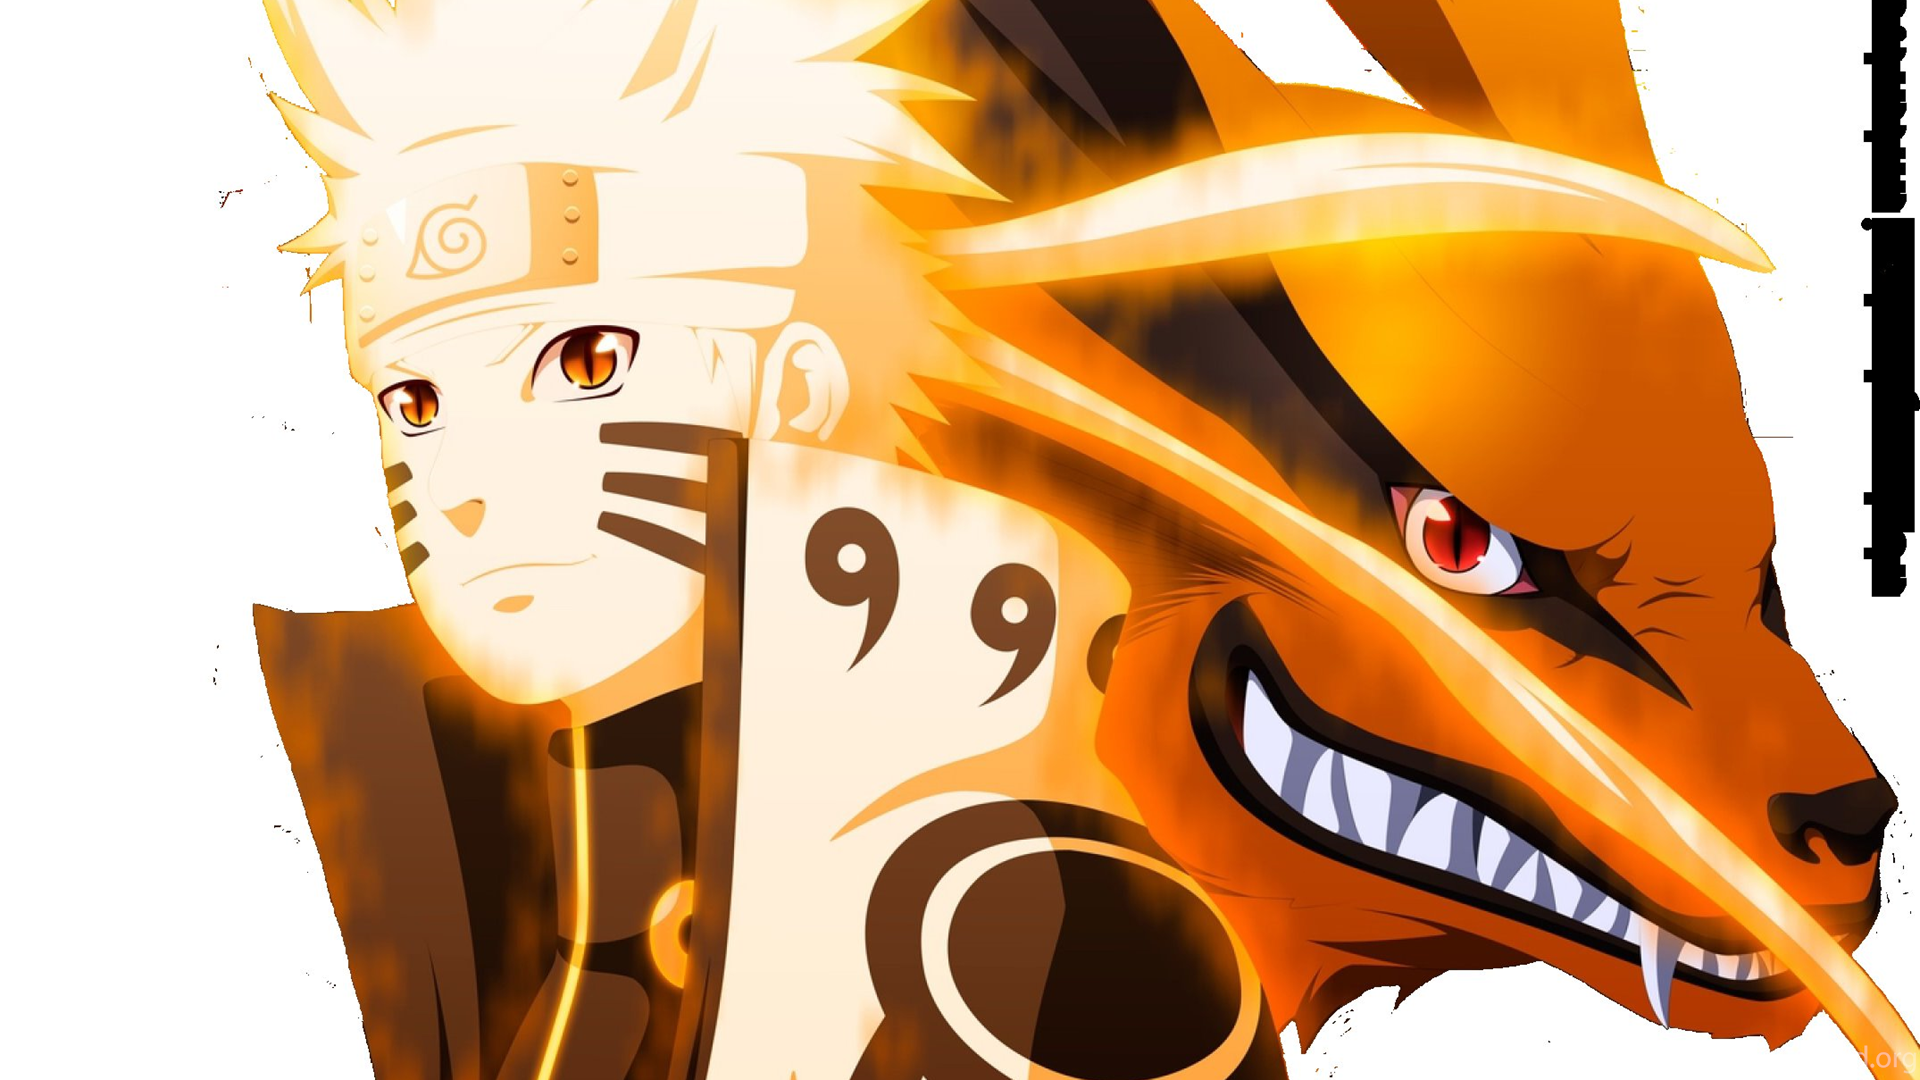 Steam Workshop - Naruto and Kurama Wallpaper (1920x1080) Link in comments